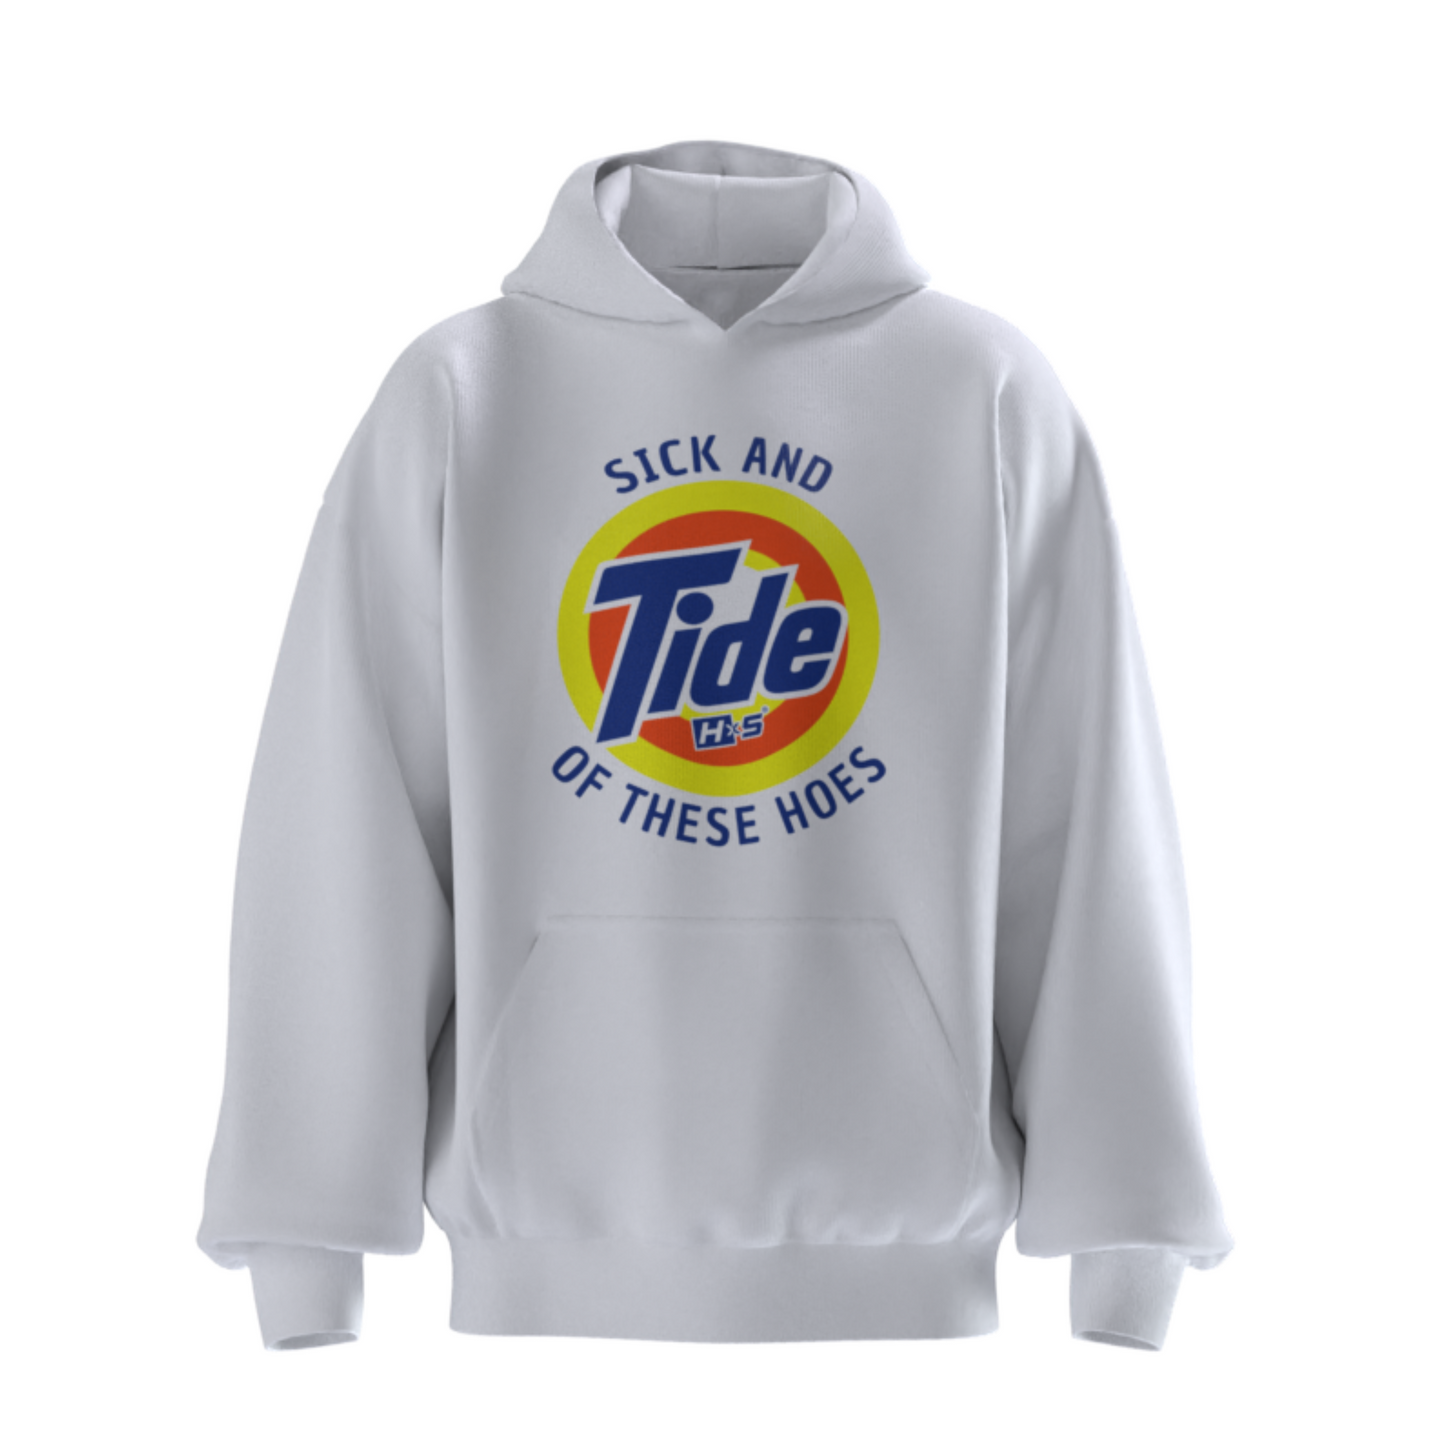 HYPExSTORE® SICK AND TIDE OF THESE HOES OVERSIZED HOODIE 380 GSM